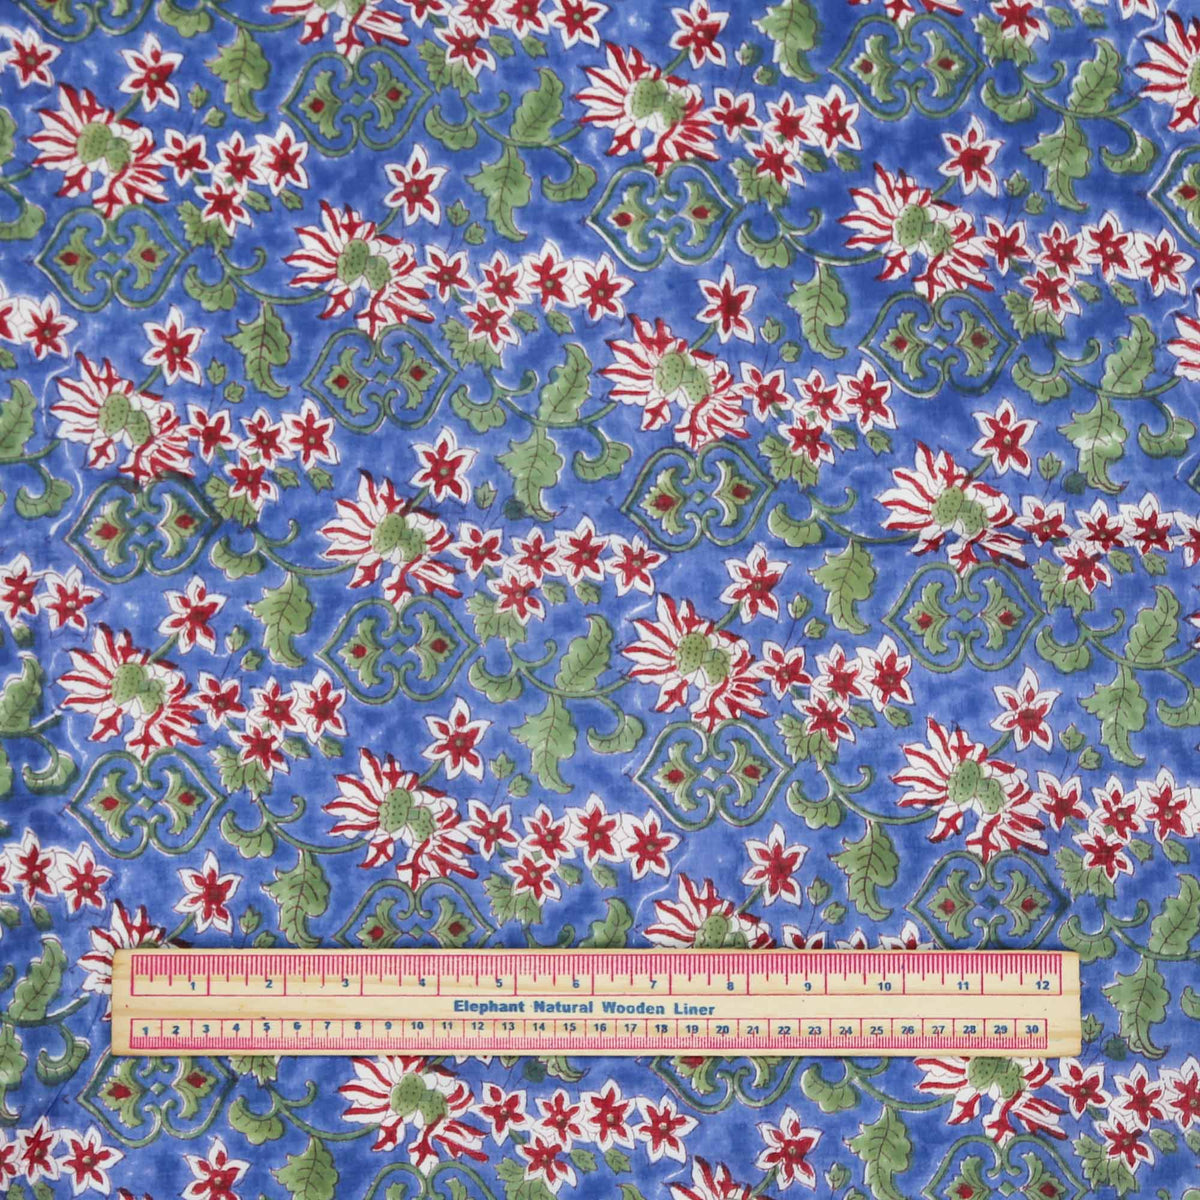 Block Print Fabric - Red Small Flowers On Blue( Design 471)